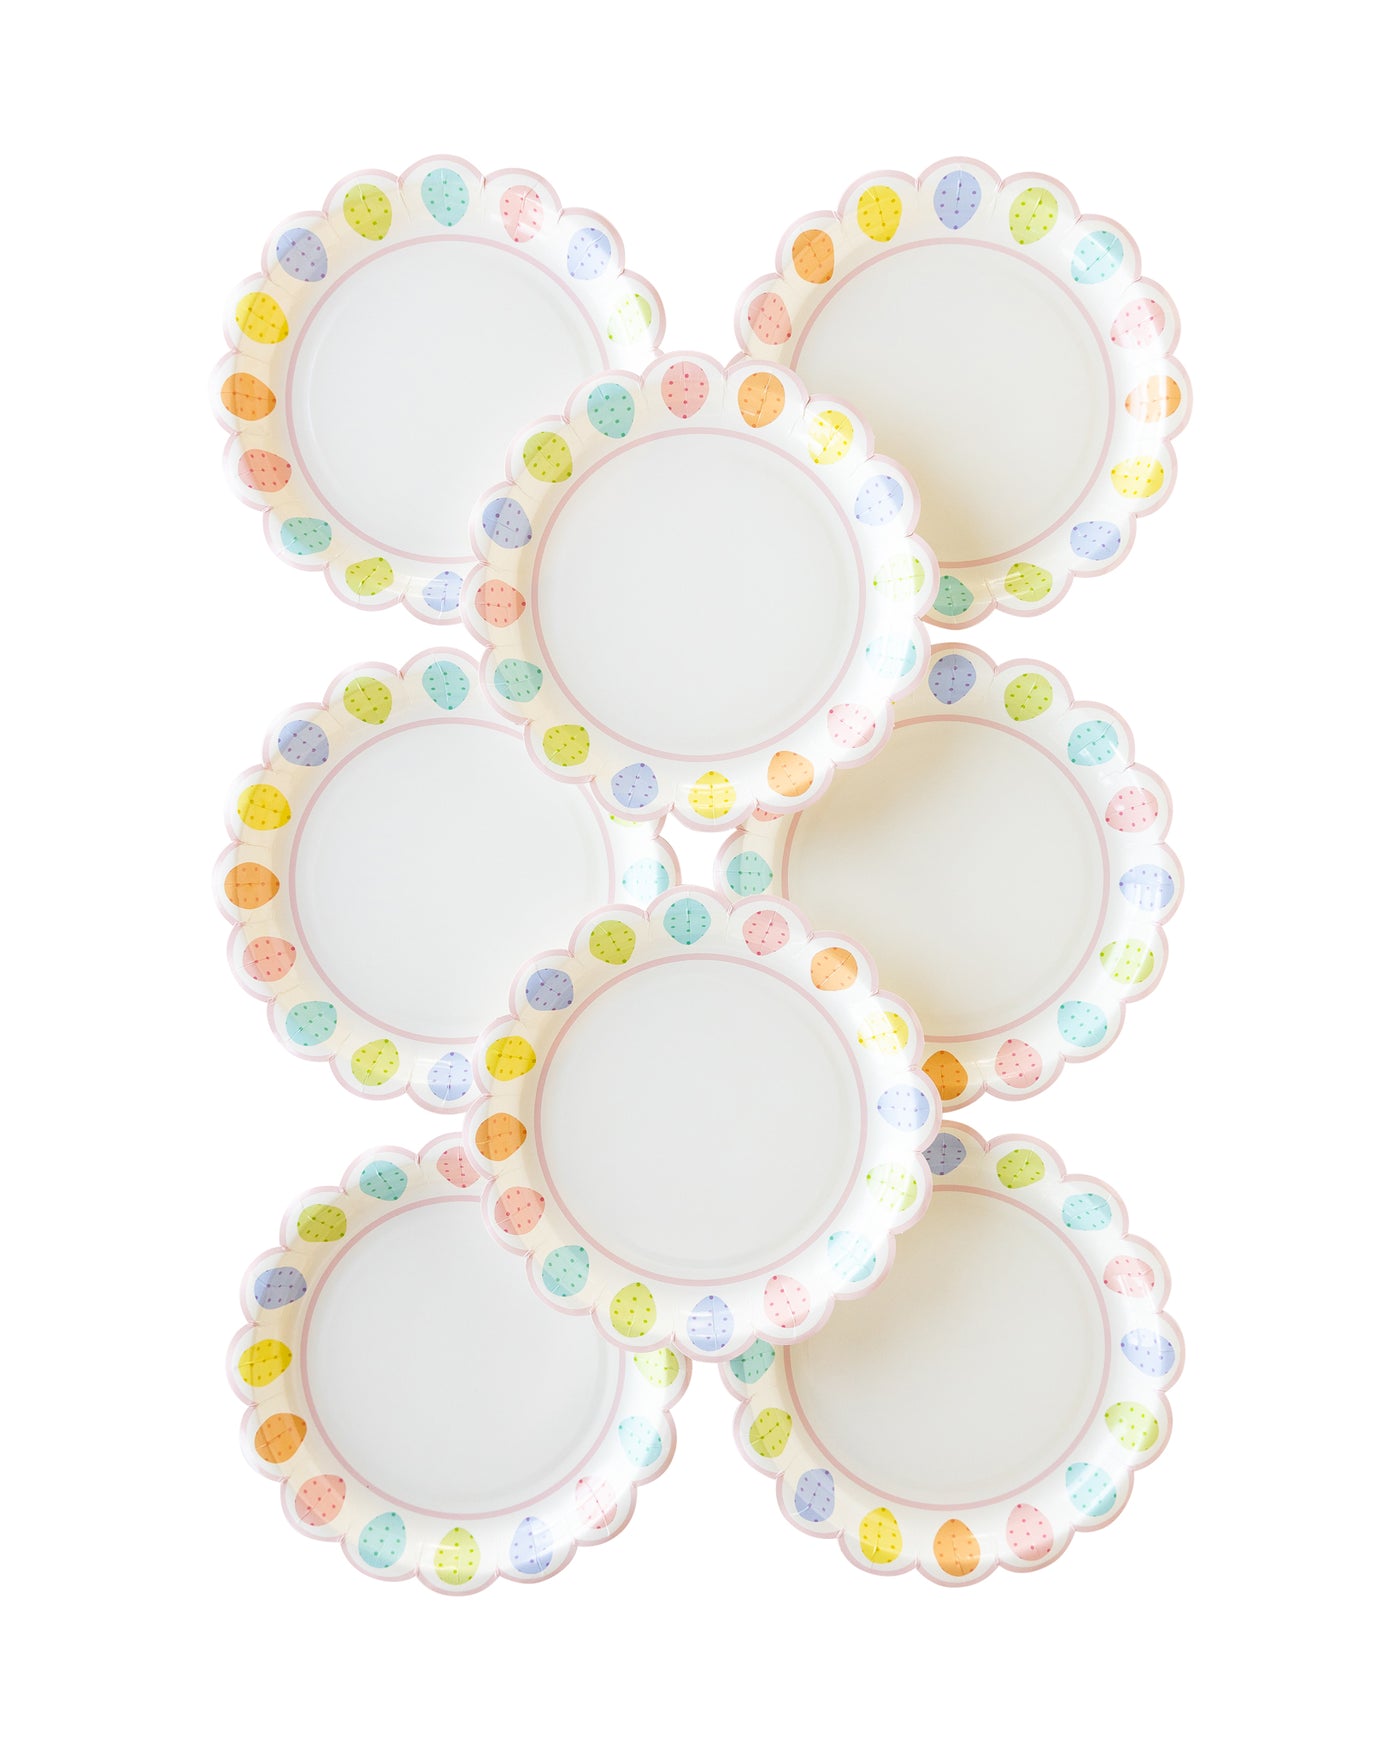 PLTS359N - Speckled Egg Plate